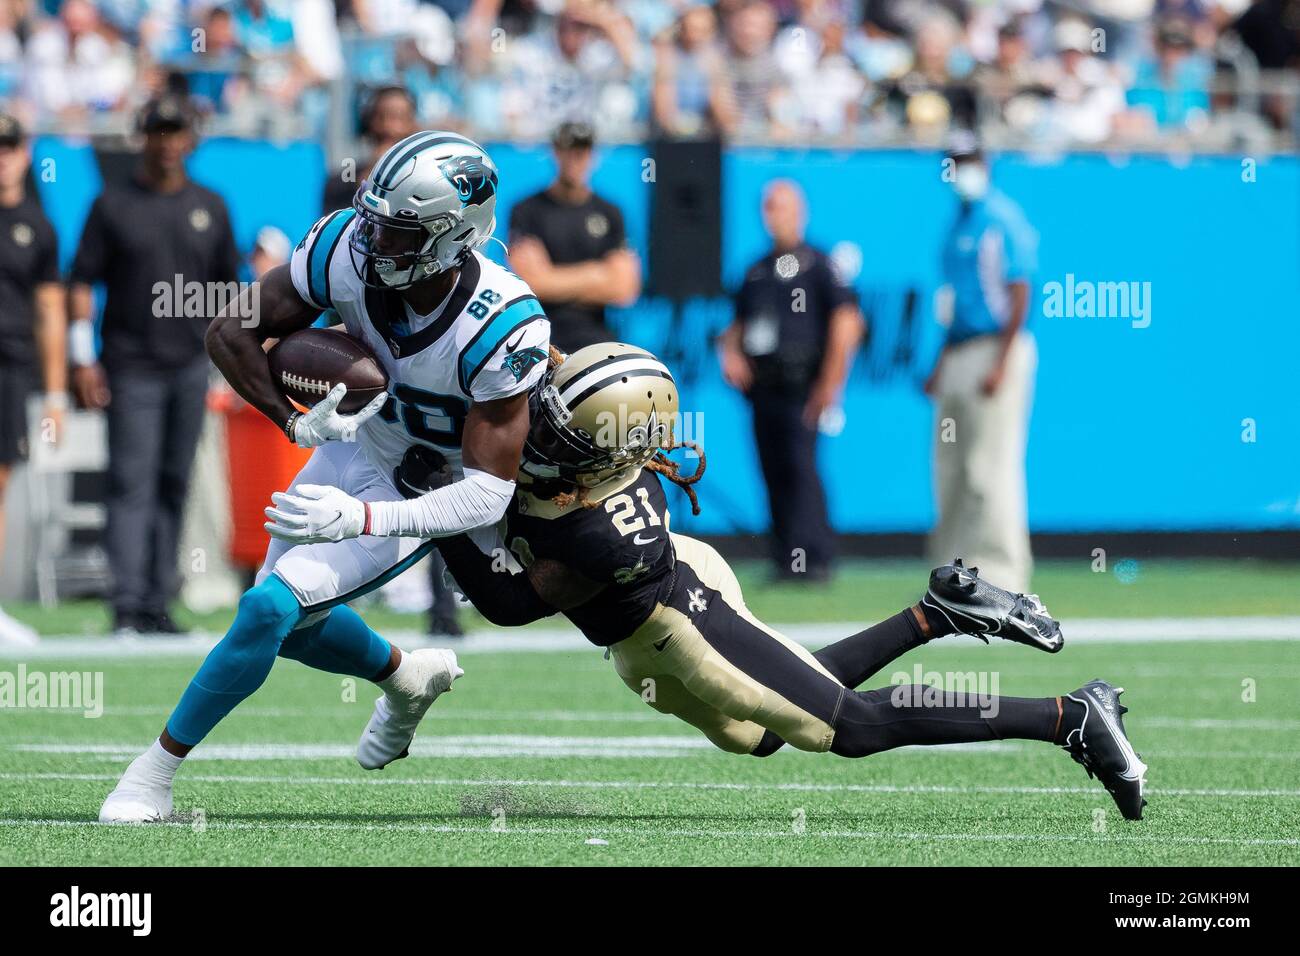 September 19, 2021: Carolina Panthers wide receiver Terrace Marshall Jr. (88) is graded by New Orleans Saints cornerback Bradley Roby (21) in the fourth quarter of the NFL matchup at Bank of America Stadium in Charlotte, NC. (Scott Kinser/Cal Sport Media) Stock Photo